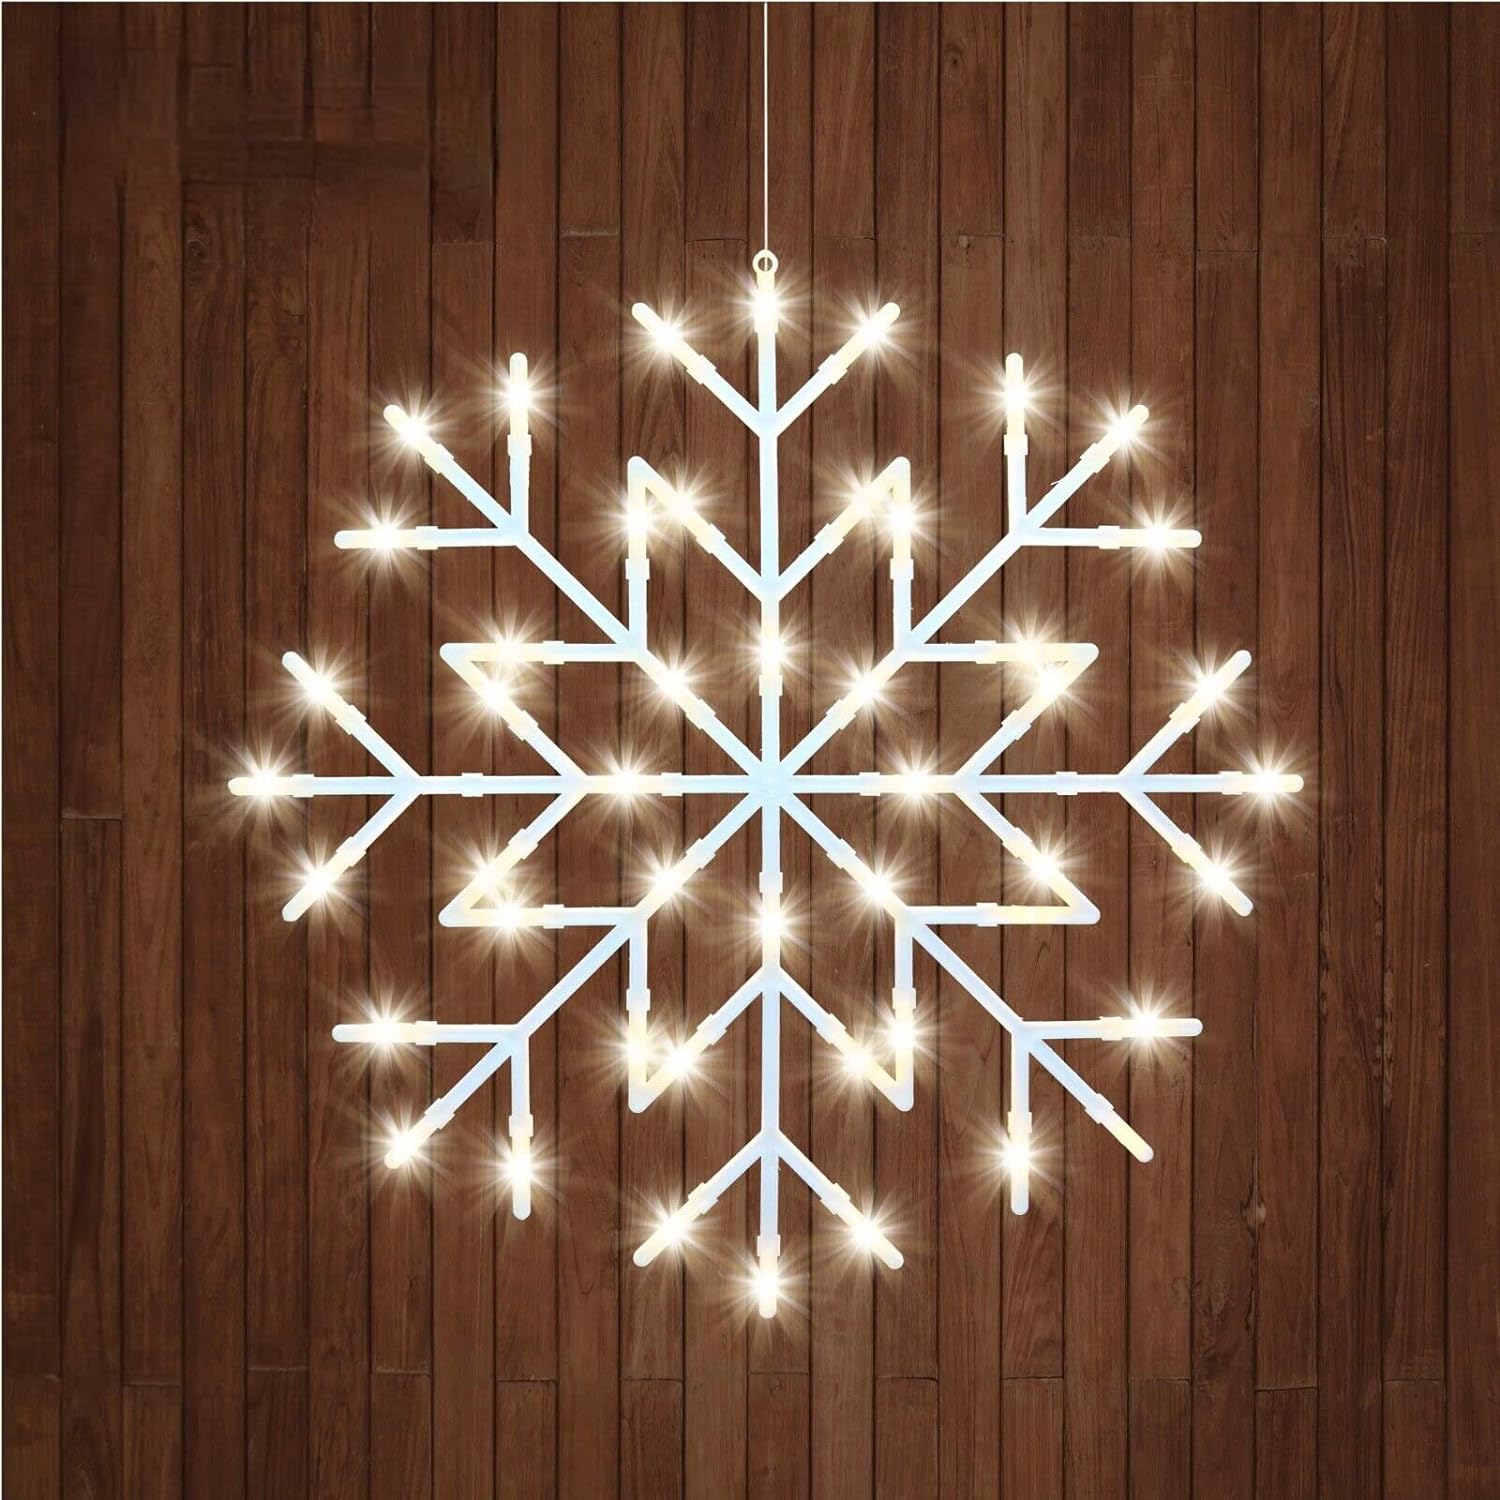 ADEPTNA Hanging 48 LED Snowflake Christmas Light with Timer Function and Battery Operated- Silhouette Window Xmas Festive Party Decoration Lights Home Office Indoor (Warm White)